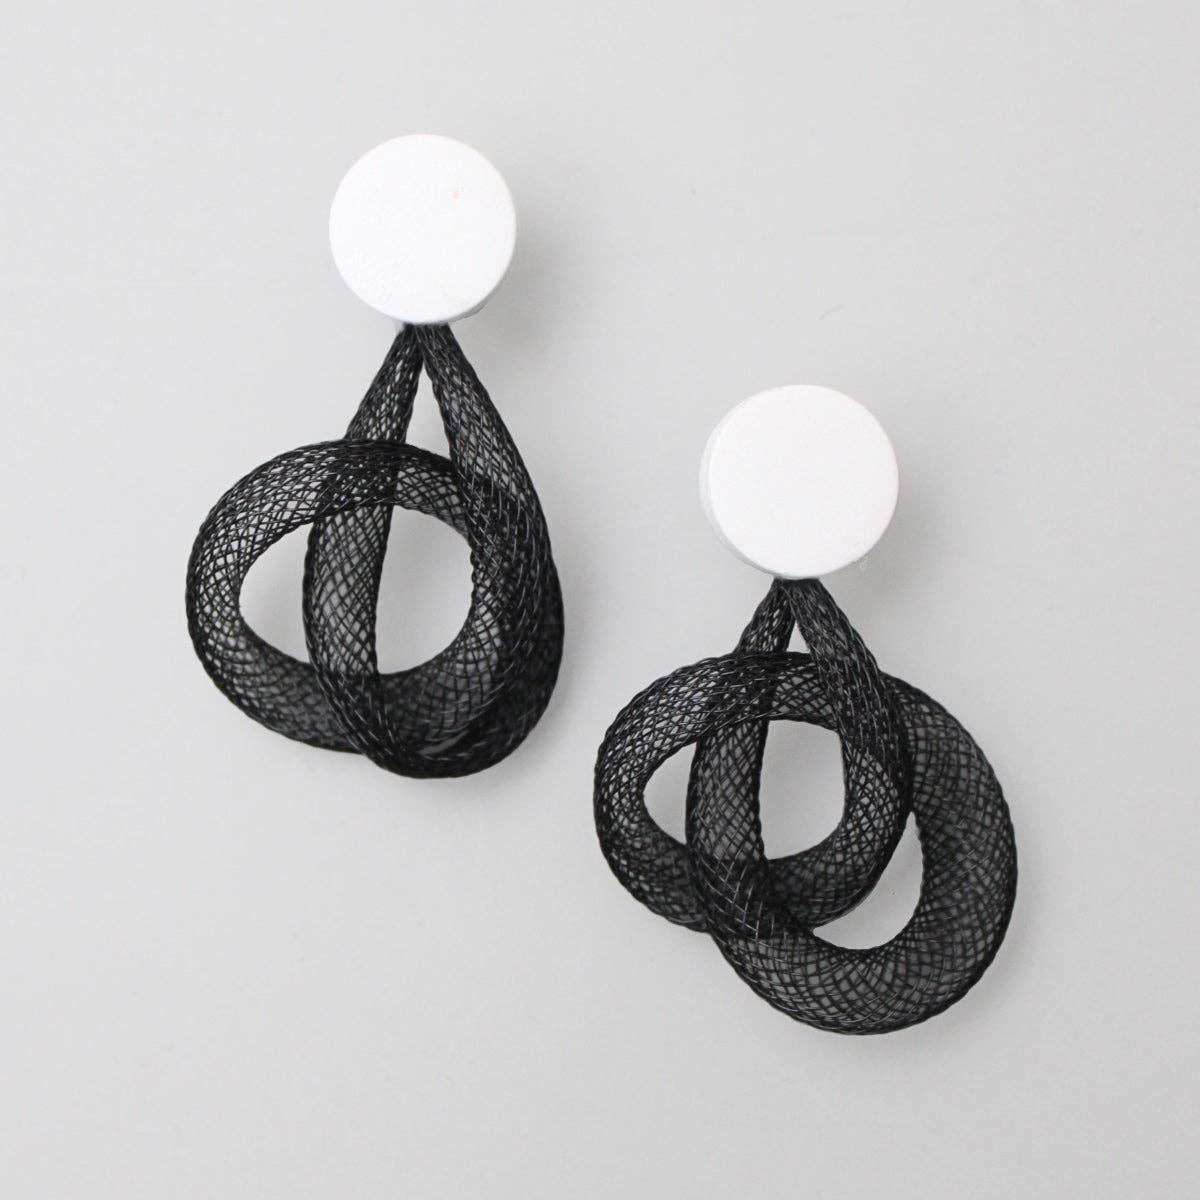 Sylca Designs - Black Mesh Abstract Earrings